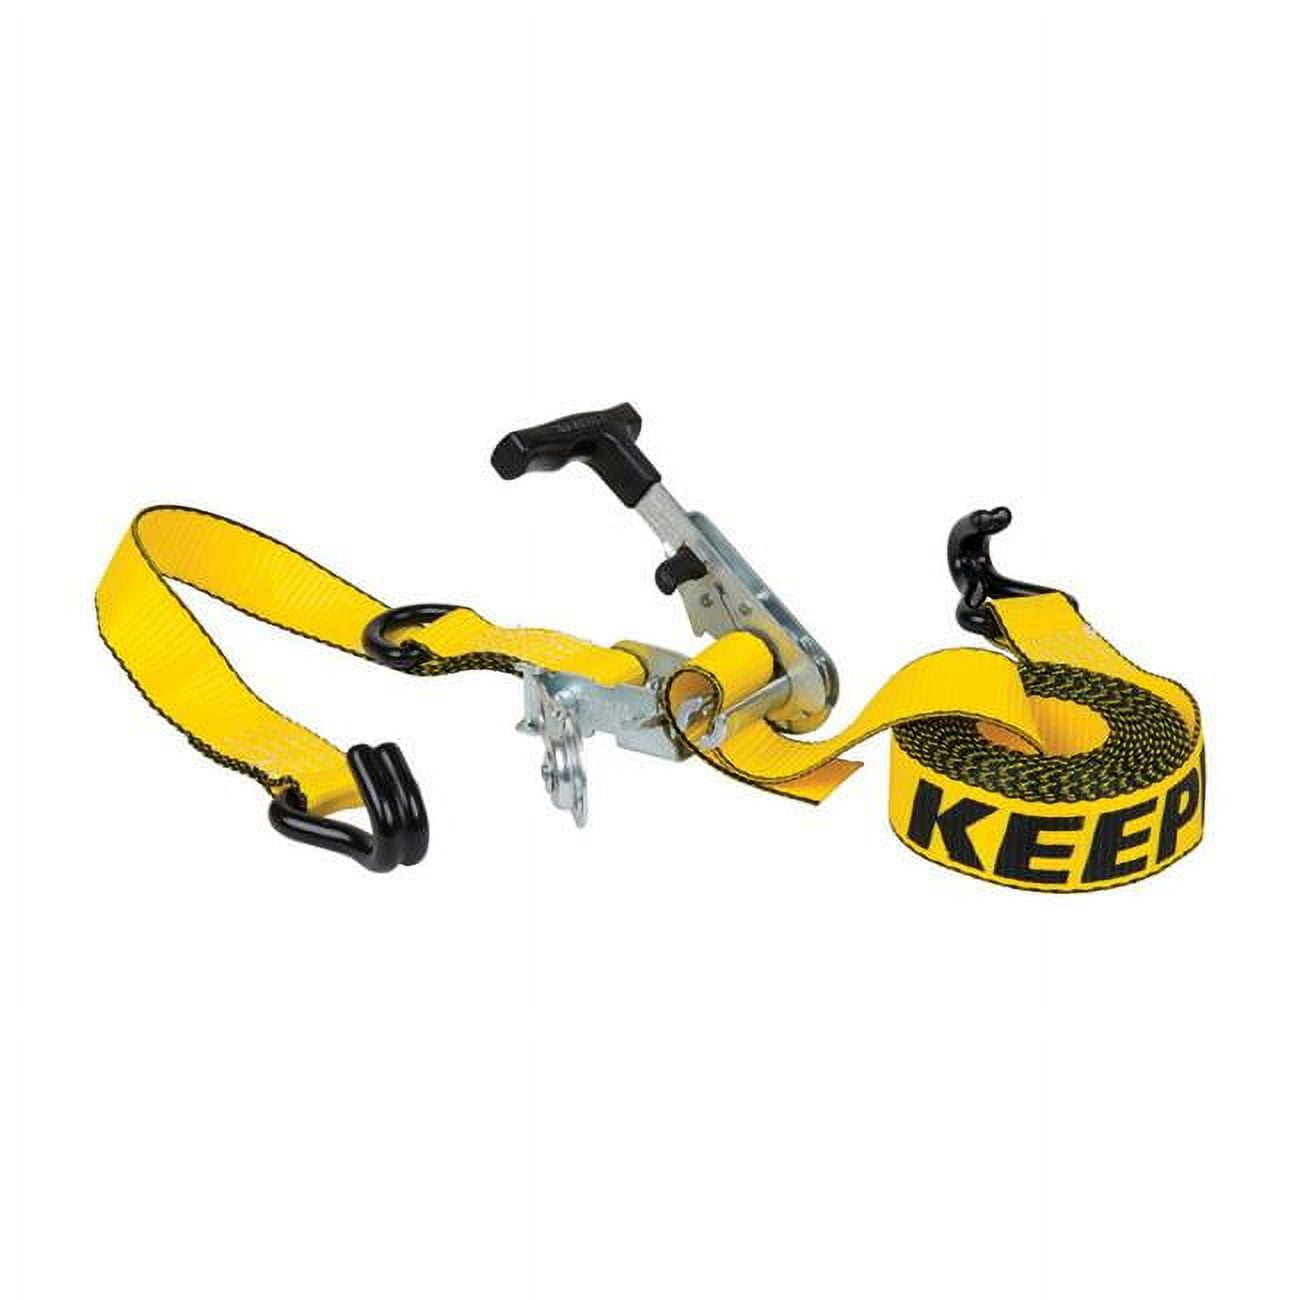 8015812 1.5 In. X 14 Ft. Yellow Tie Down With Ratchet - 1467 Lbs